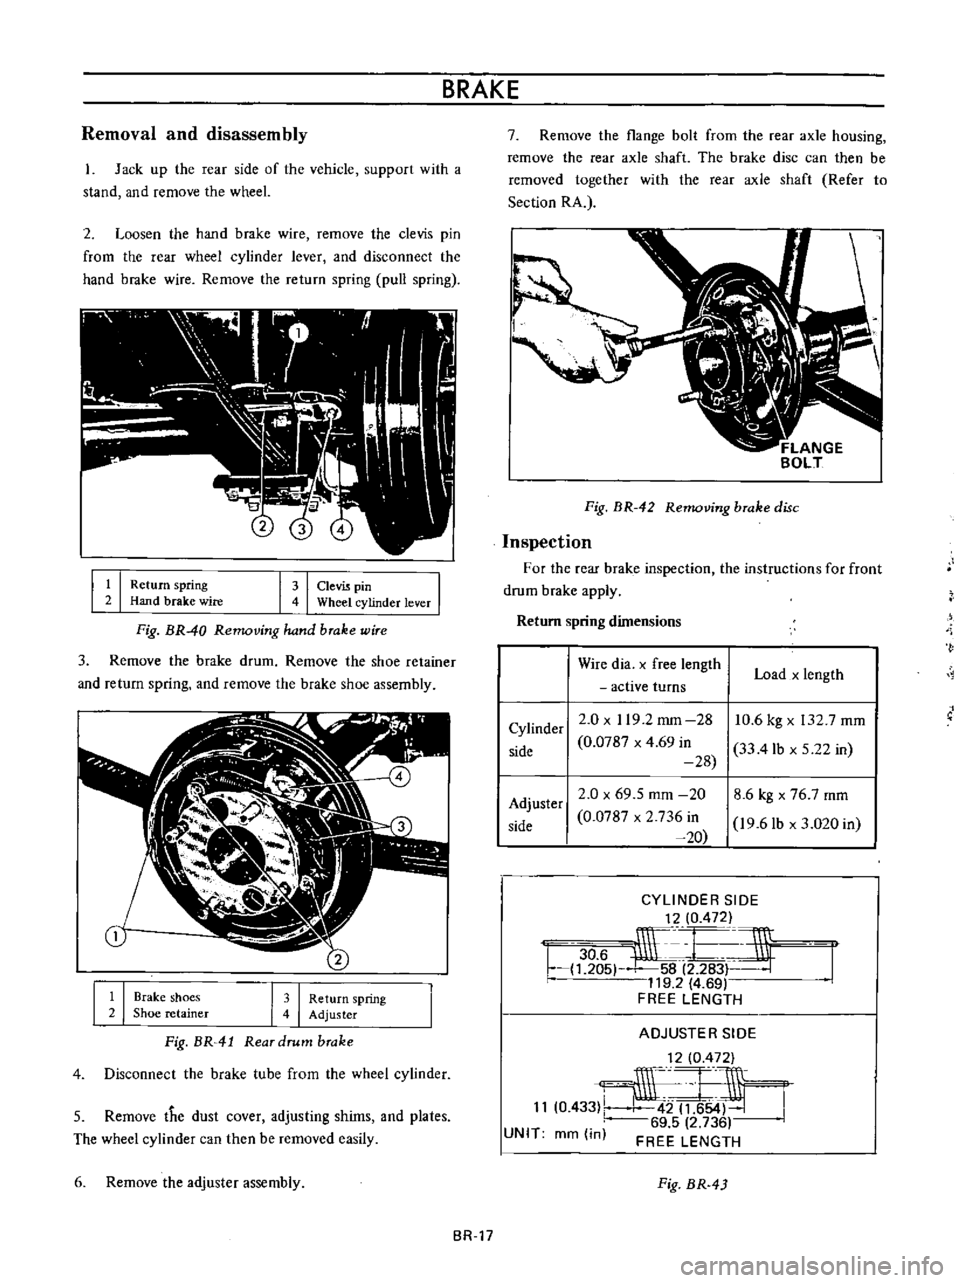 DATSUN B110 1973  Service Repair Manual 
BRAKE

Removal 
and

disassembly

1 
Jack

up 
the 
rear 
side 
of 
the 
vehicle

support 
with 
a

stand 
and 
remove 
the

wheeL

2 
Loosen

the 
hand 
brake 
wire 
remove

the 
clevis

pin

from 
